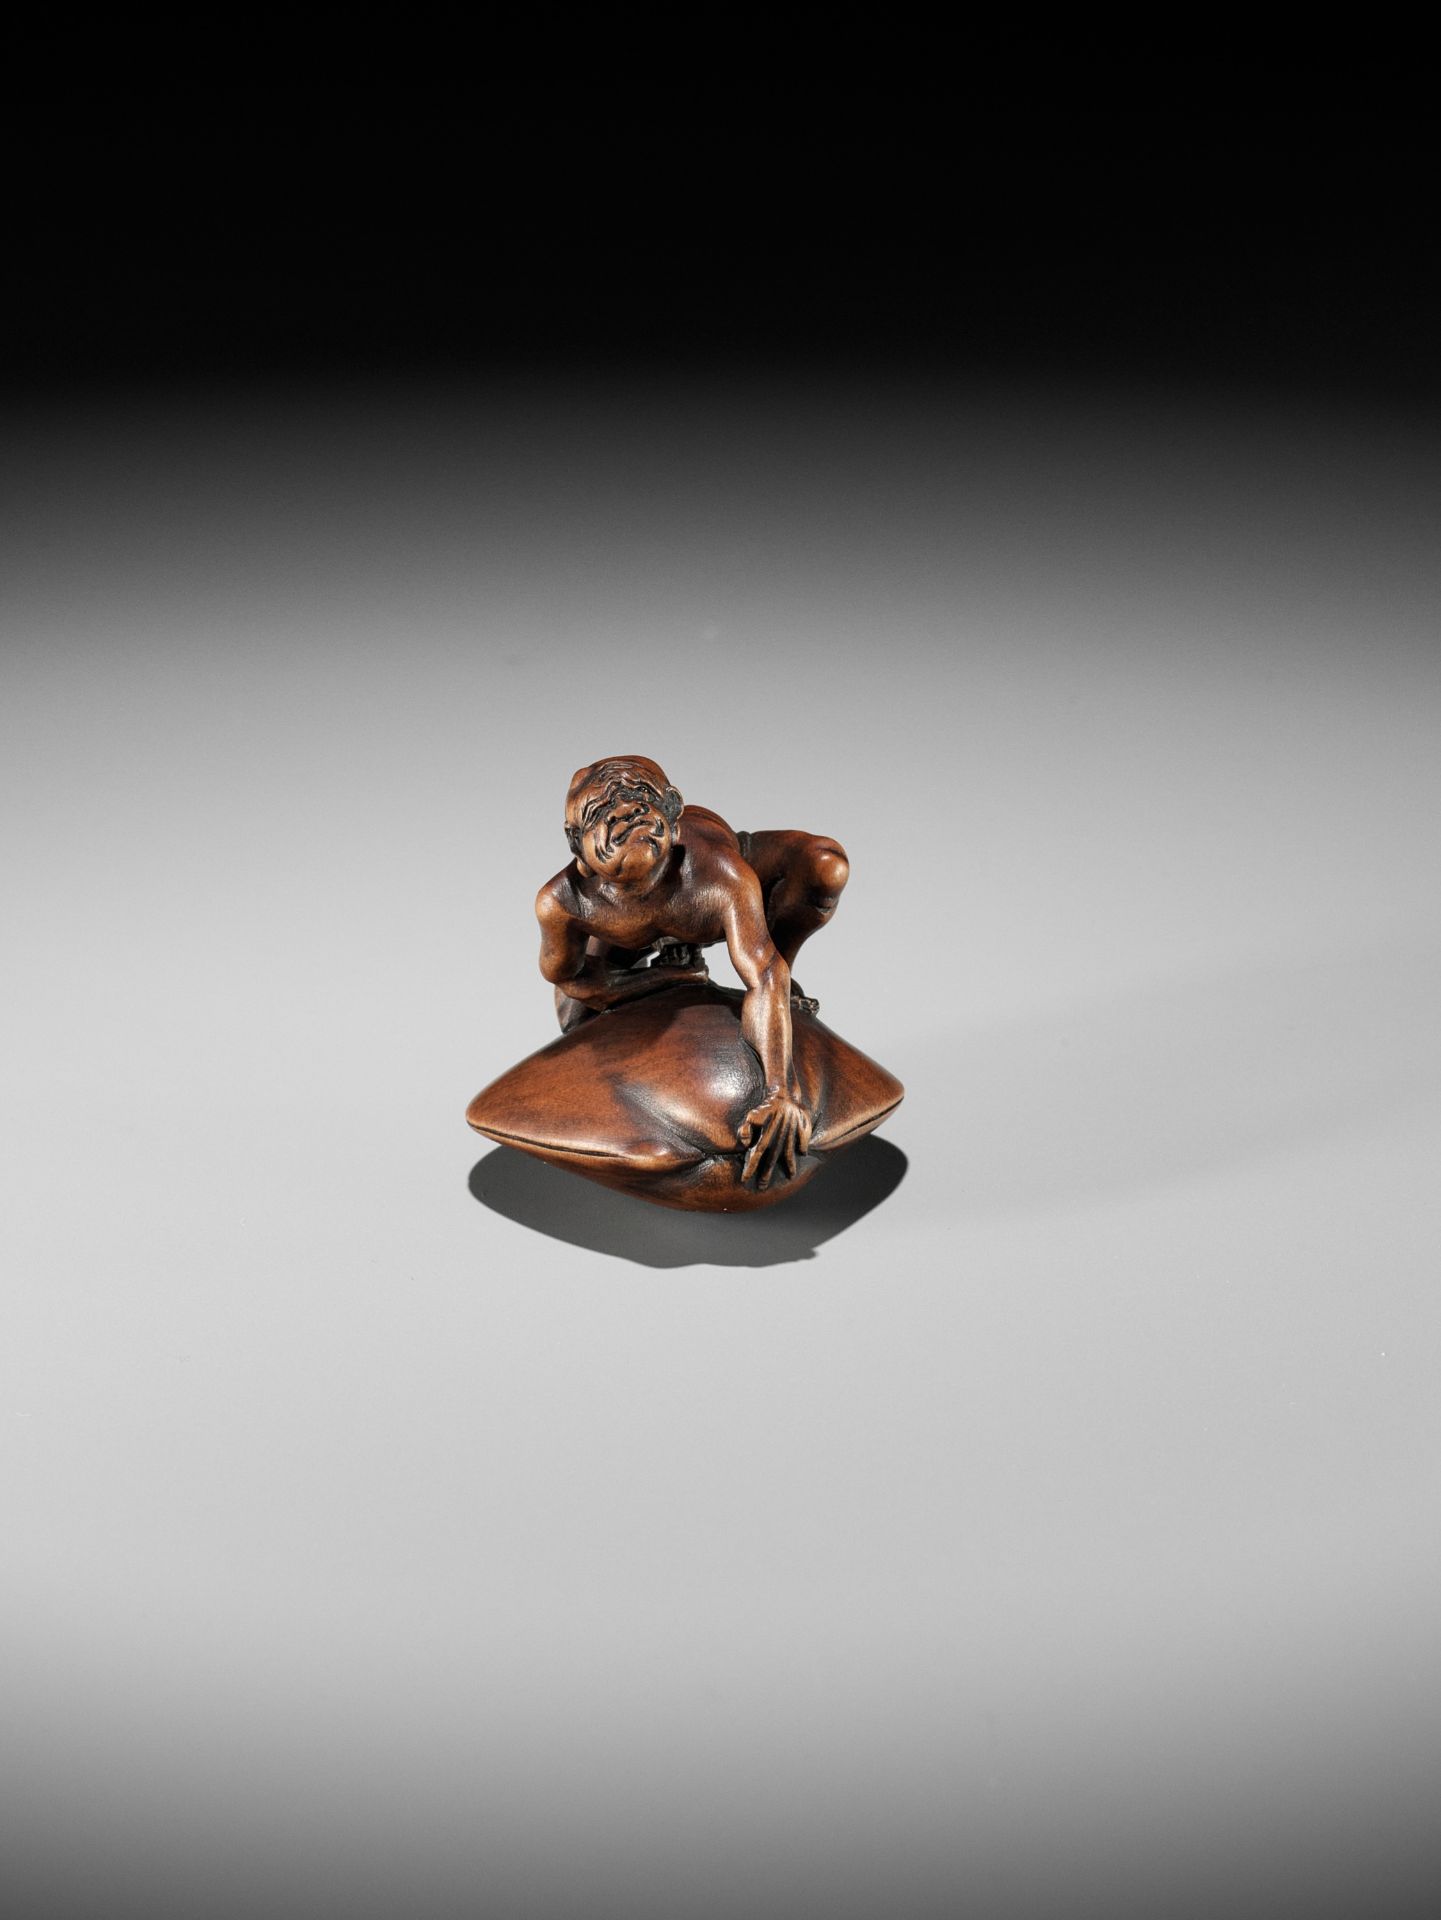 GYOKUZAN: A MASTERFUL MINIATURE WOOD NETSUKE OF A BLINDMAN BEING TRAPPED BY A CLAM - Image 10 of 12